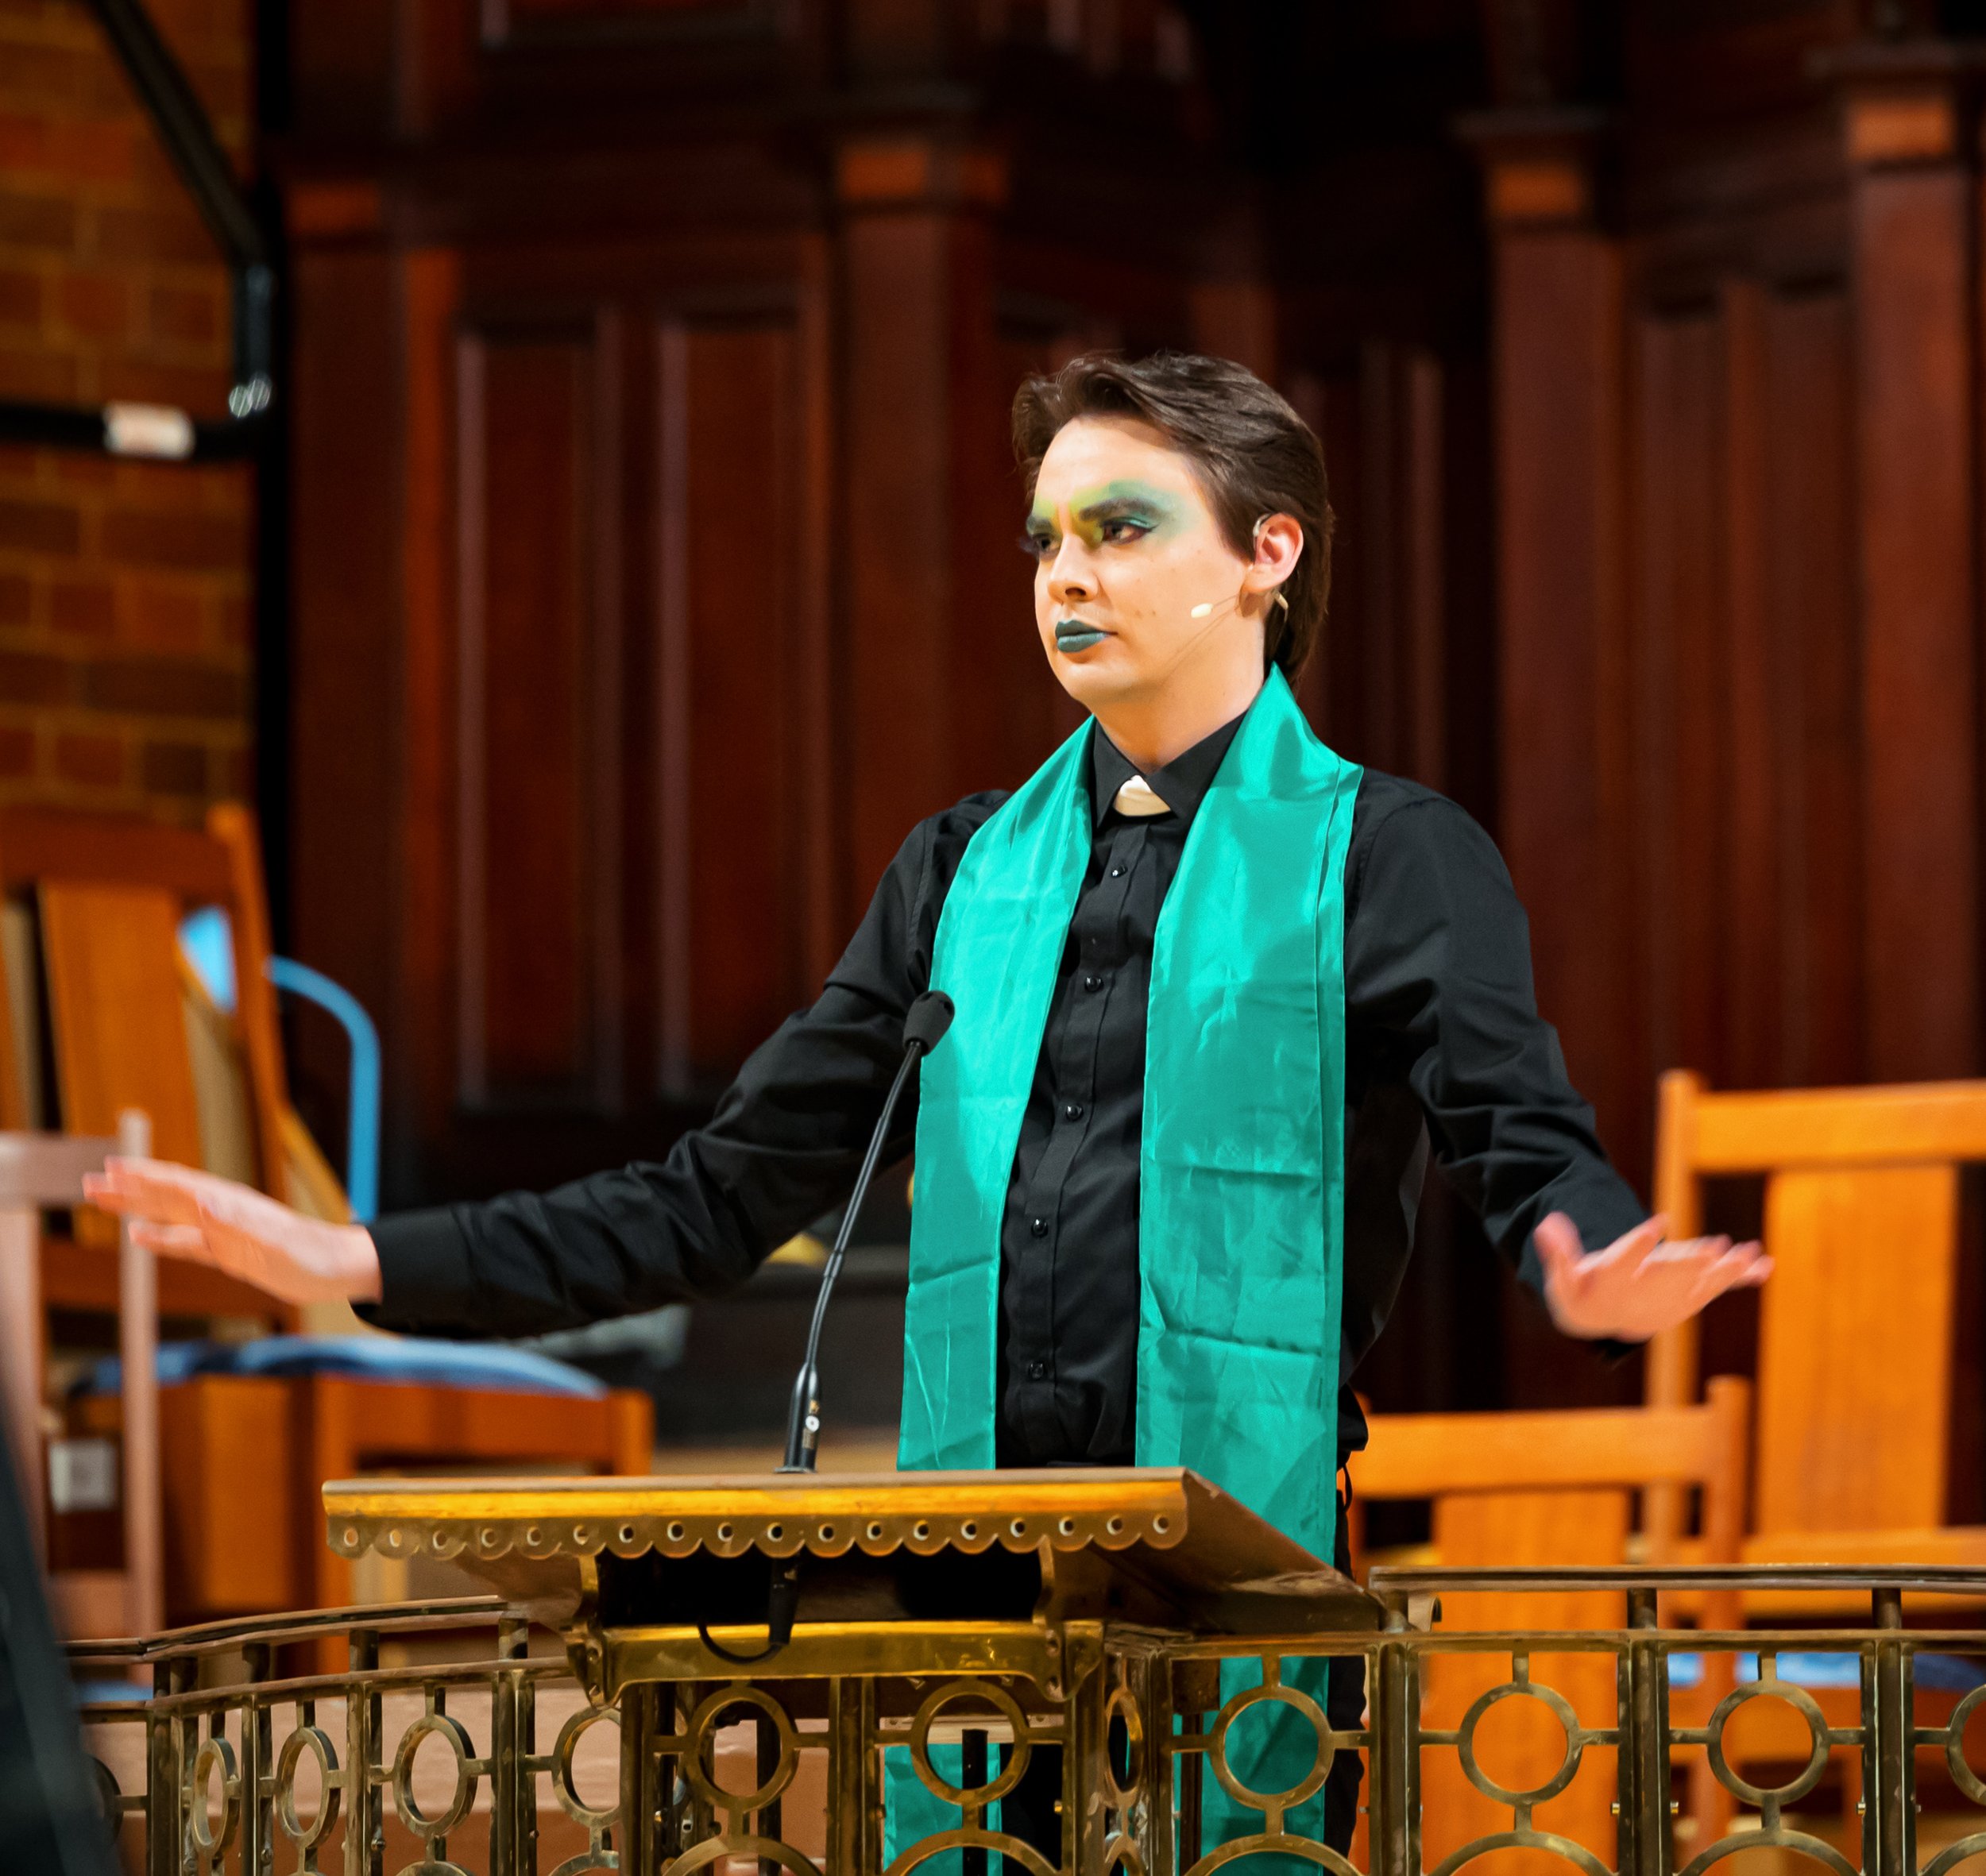  “Full of brilliant one liners, the Priest played by Trent Charles, brought a nice continuity to the show with just the right amount of cheeky irreverence” NEHIB 